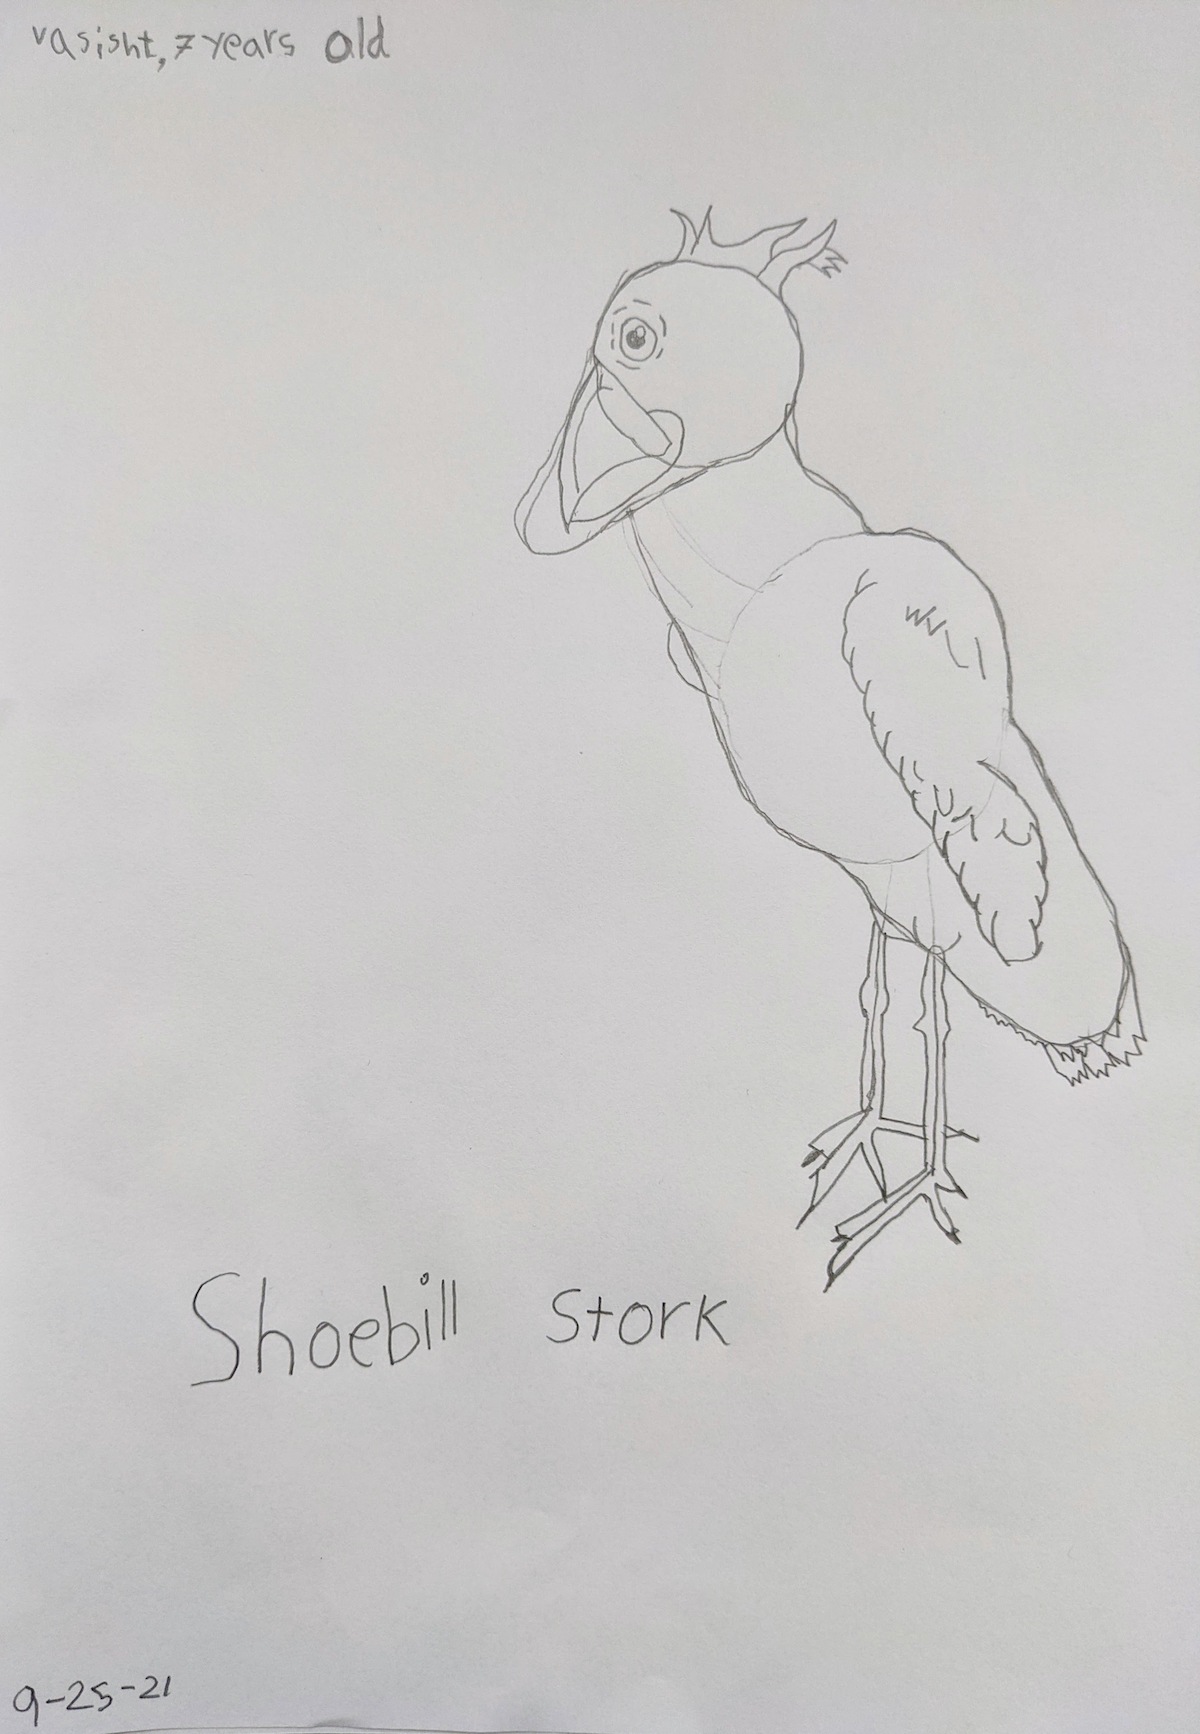 pencil drawing of a shoebill stork on off-white paper